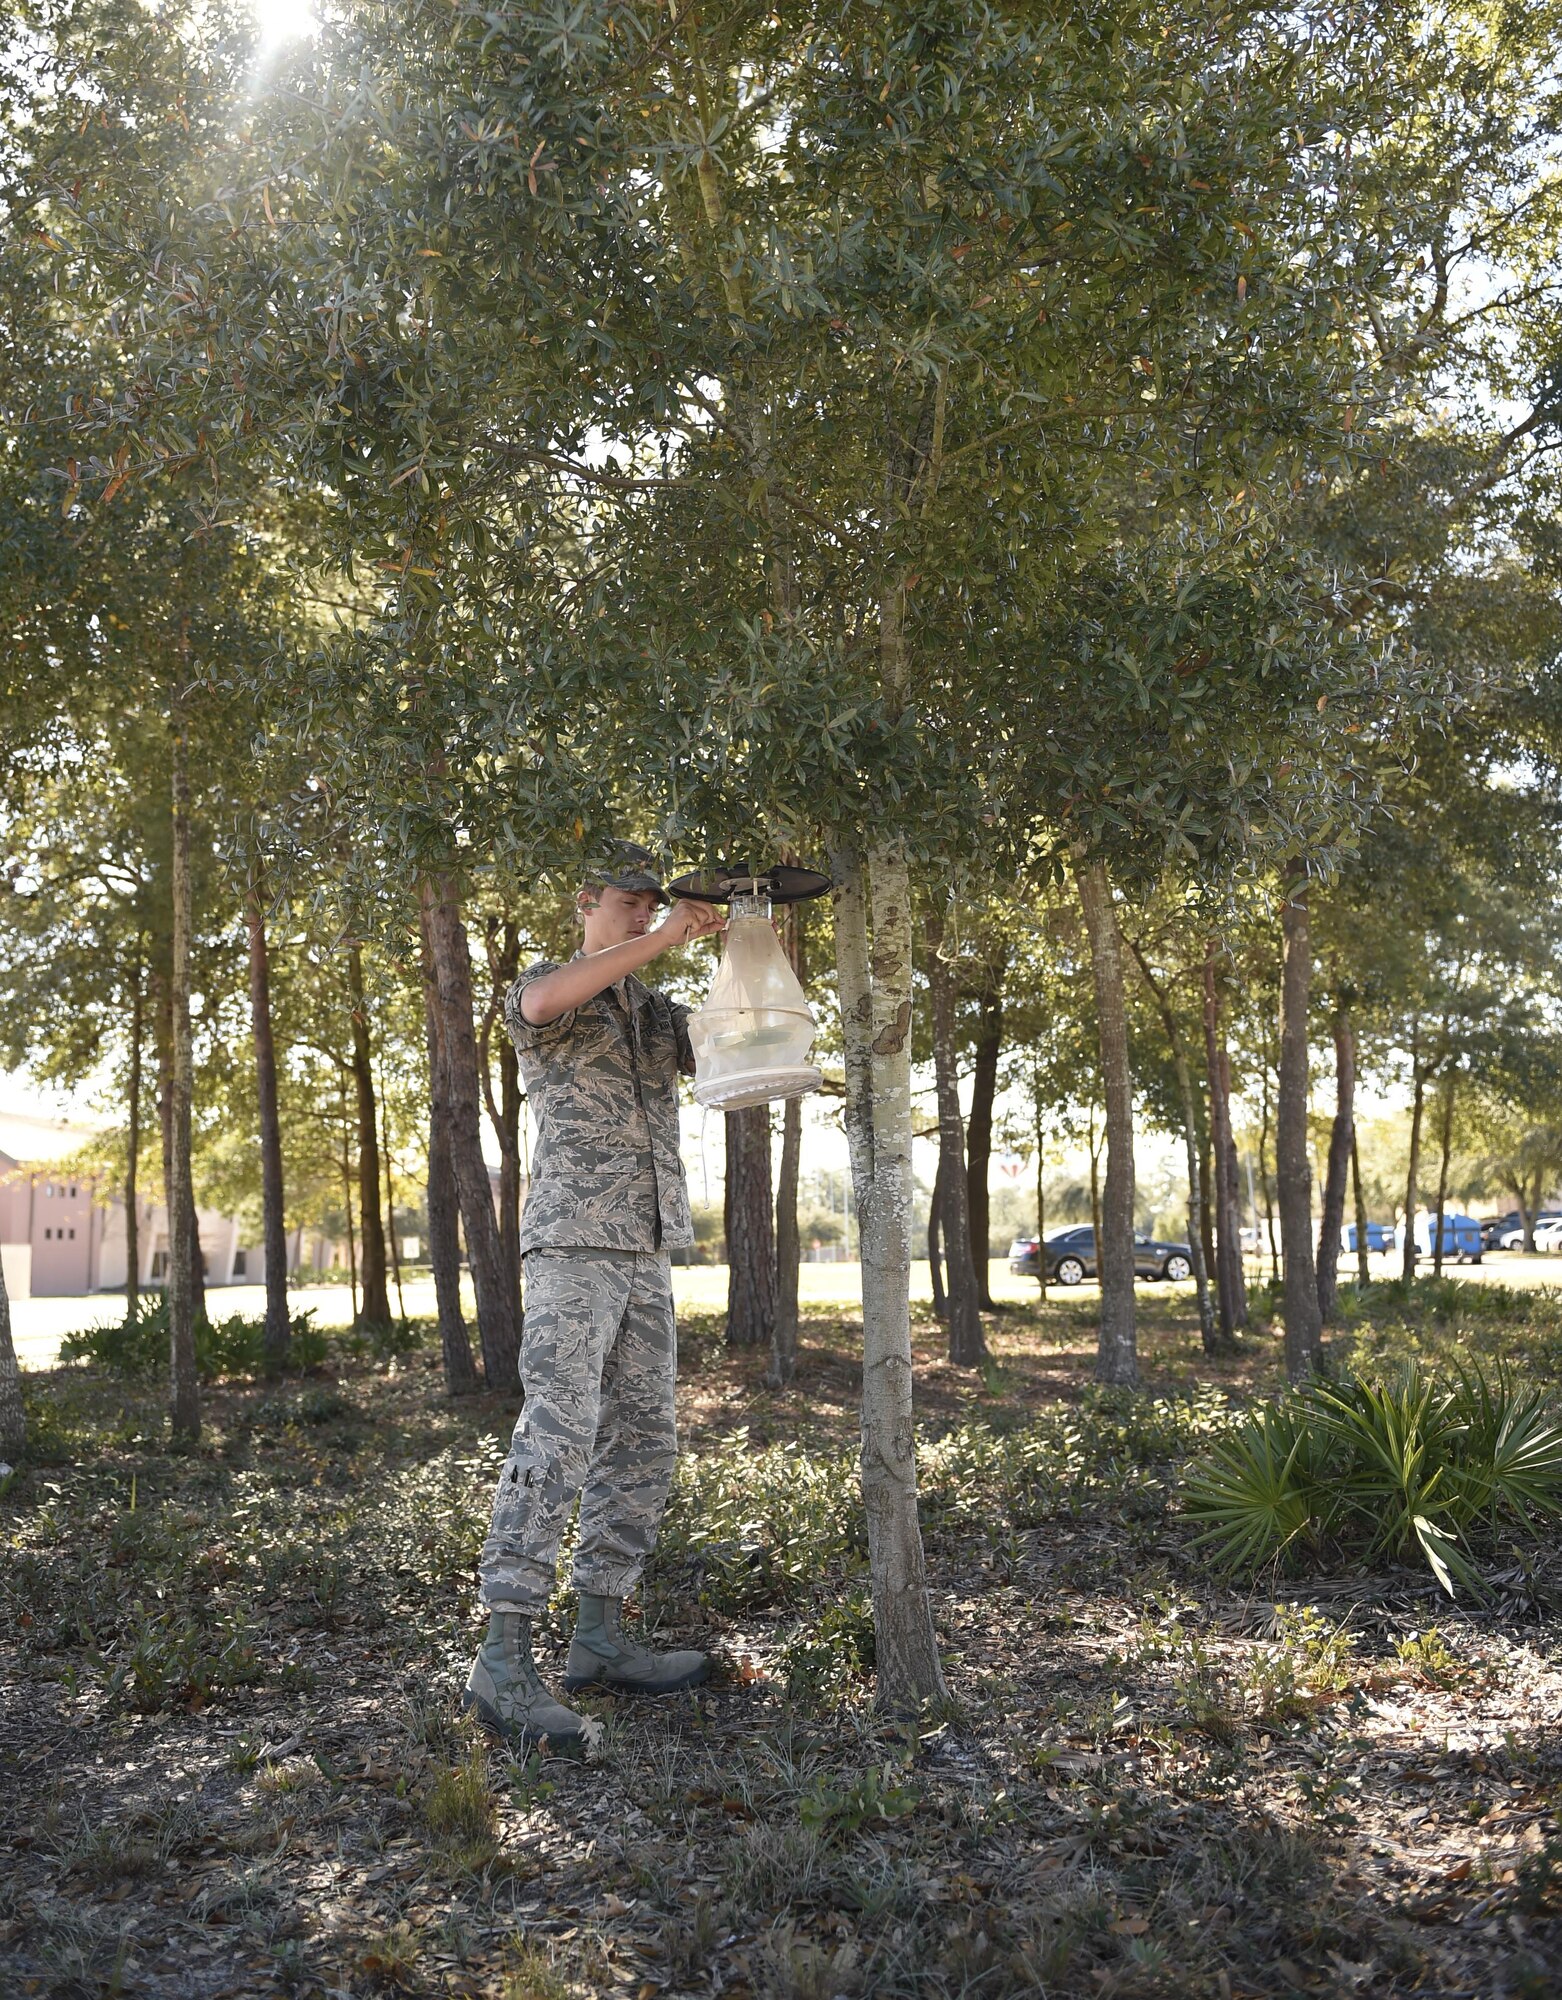 Airman 1st Class Kyle Engle, a public health technician with the 1st Special Operations Medical Group, hangs a mosquito trap in a tree at Hurlburt Field, Fla., Feb. 5, 2016. The mosquito traps will be hung around Hurlburt to catch specimens for later identification in a lab at Wright-Patterson Air Force Base, Ohio. (U.S. Air Force photo by Airman 1st Class Kai White)
